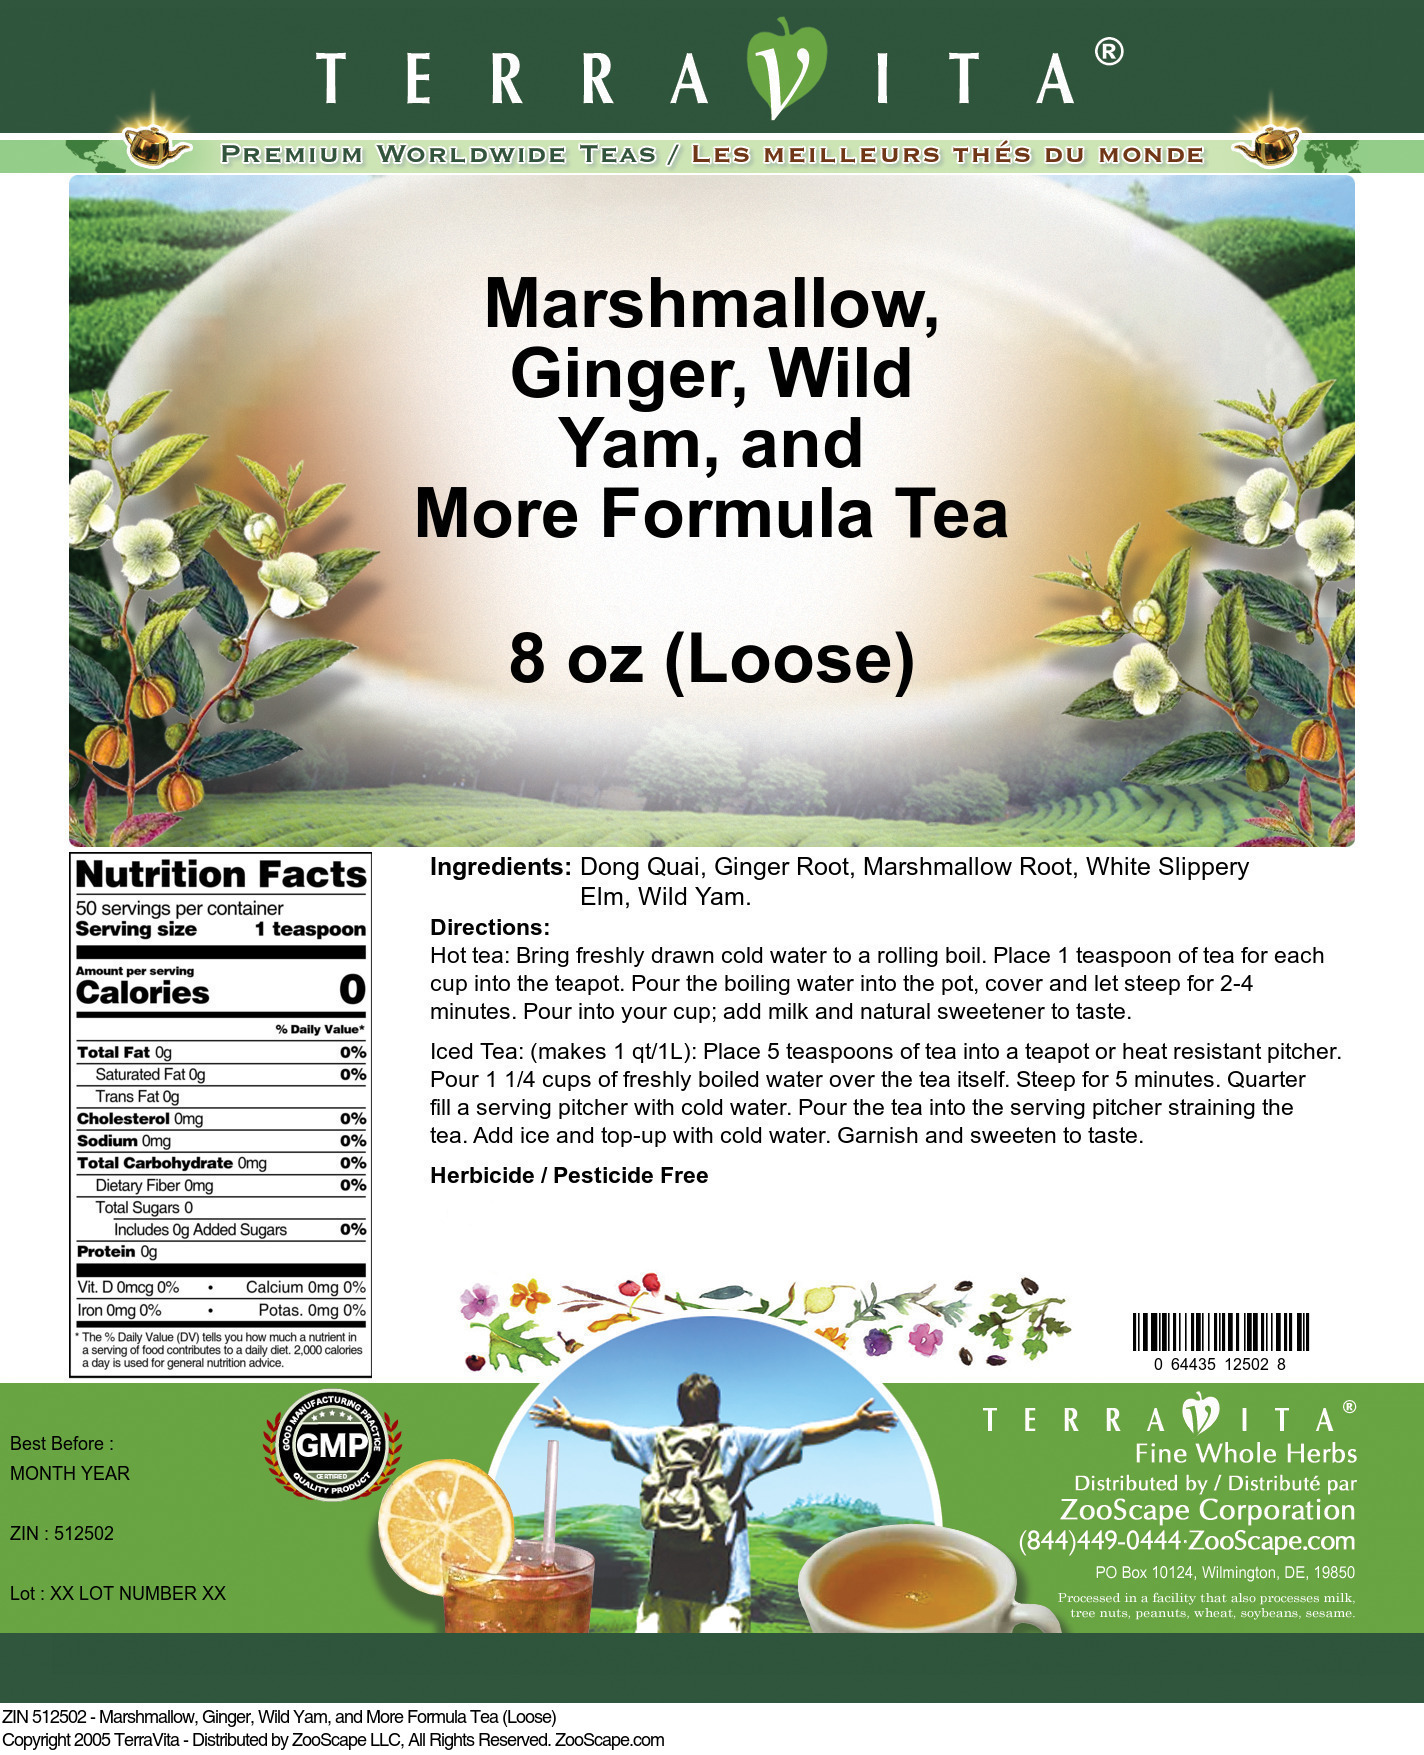 Marshmallow, Ginger, Wild Yam, and More Formula Tea (Loose) - Label